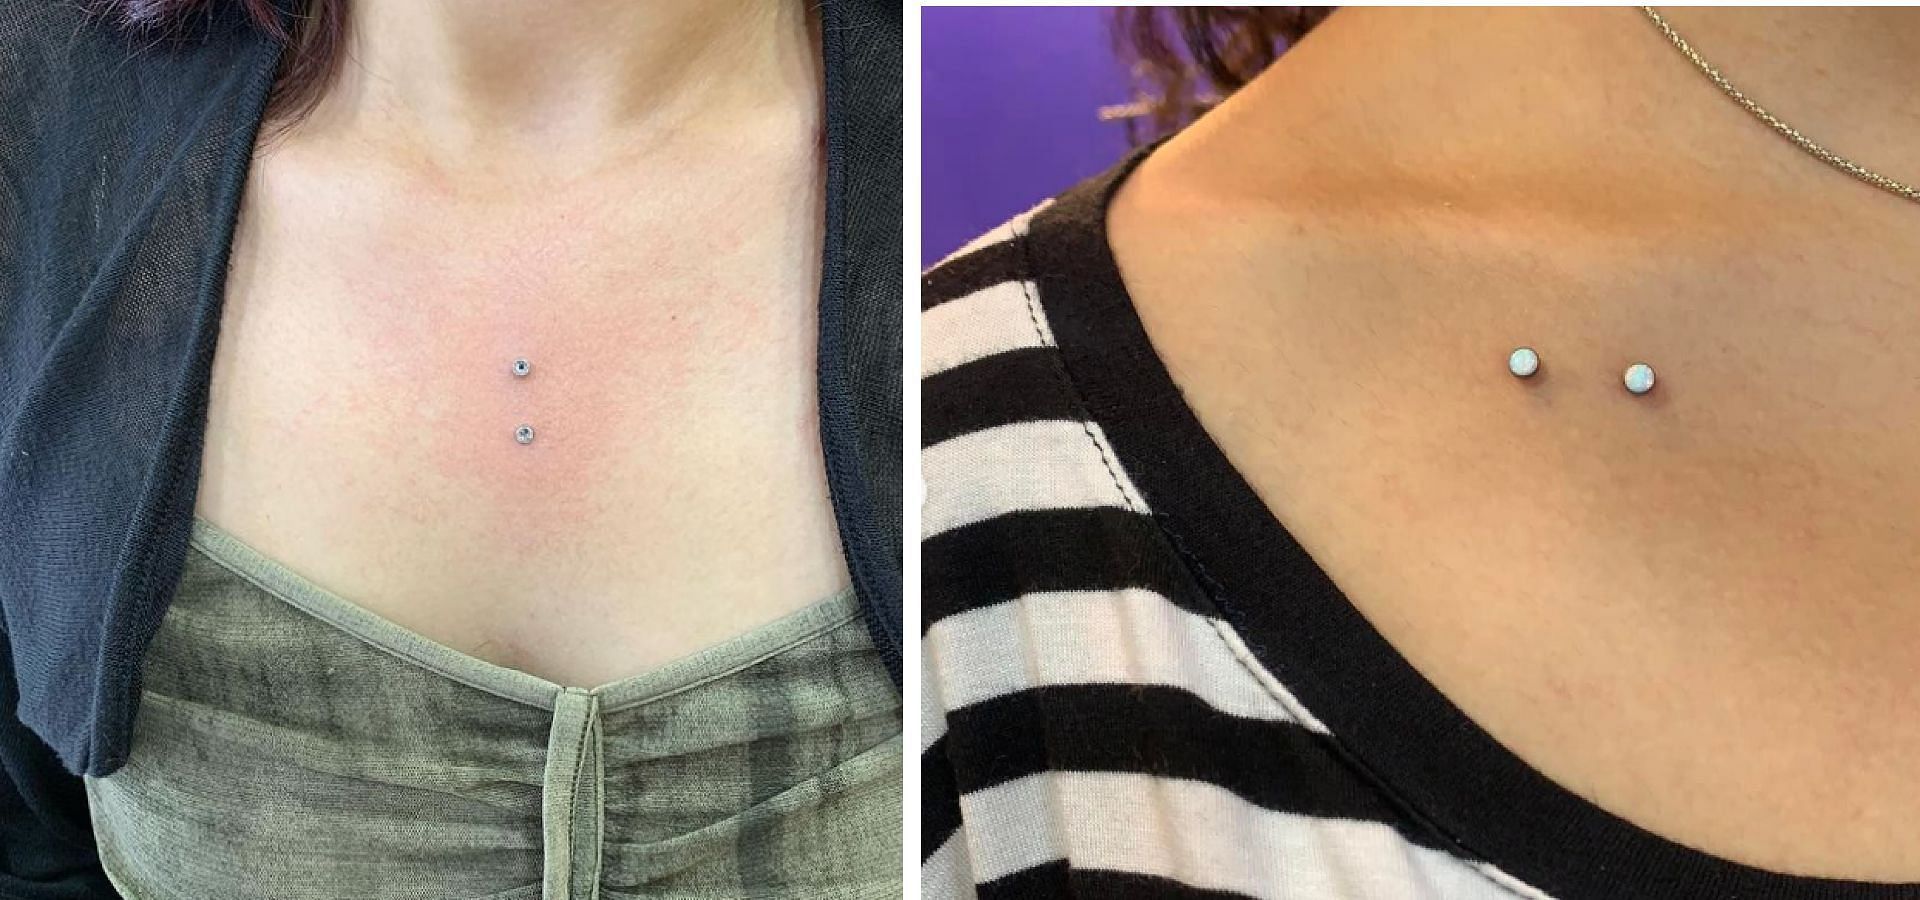 Discover this latest piercing trend (Image via Instagram/hottypiercingclinic)